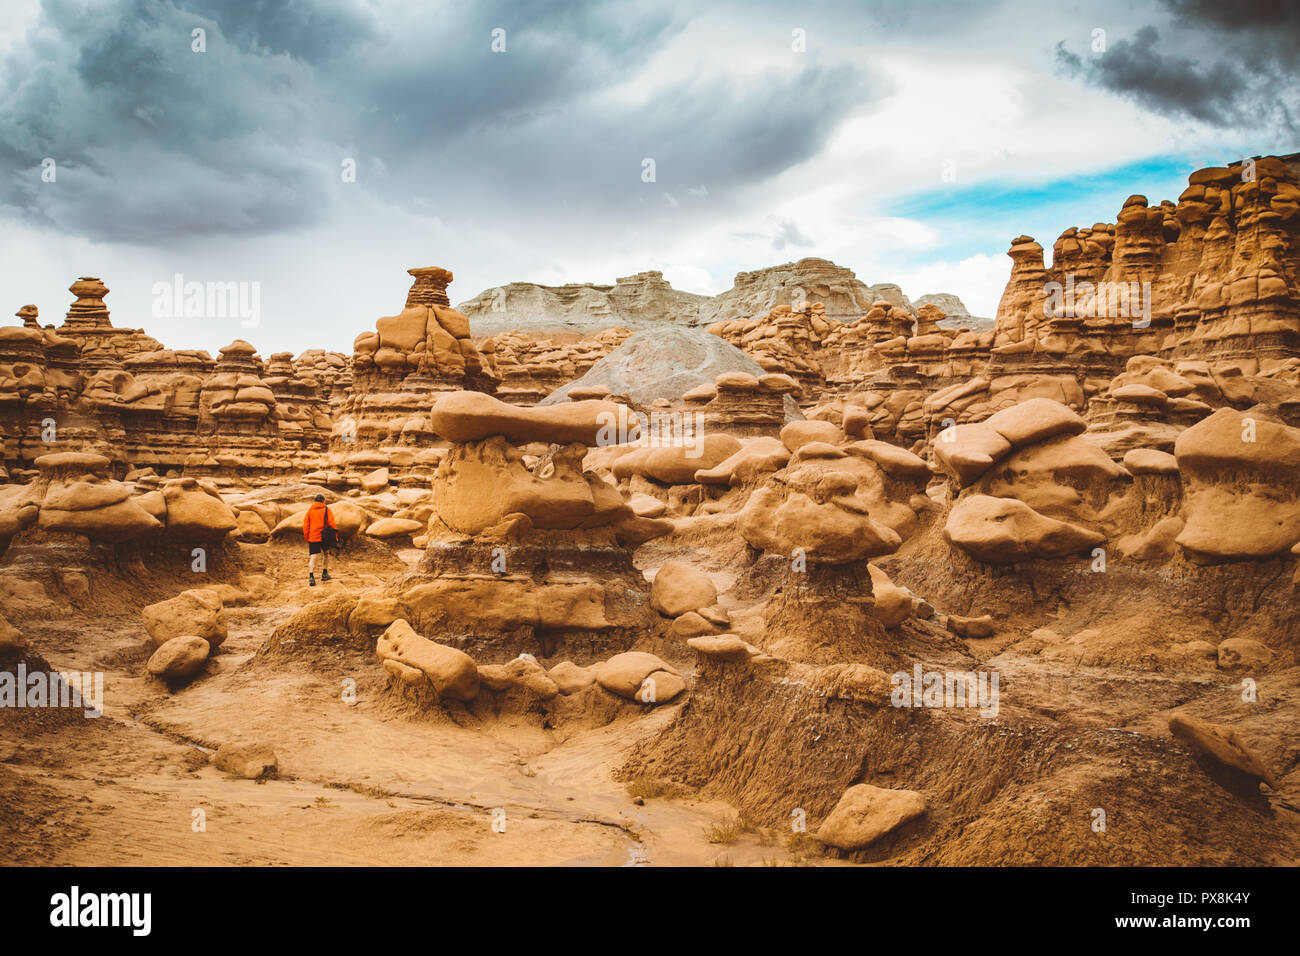 Panoramic view of hiker in red jacket standing in Goblin Valley State Park amidst beautiful hoodoos sandstone formations, Utah, USA Stock Photo